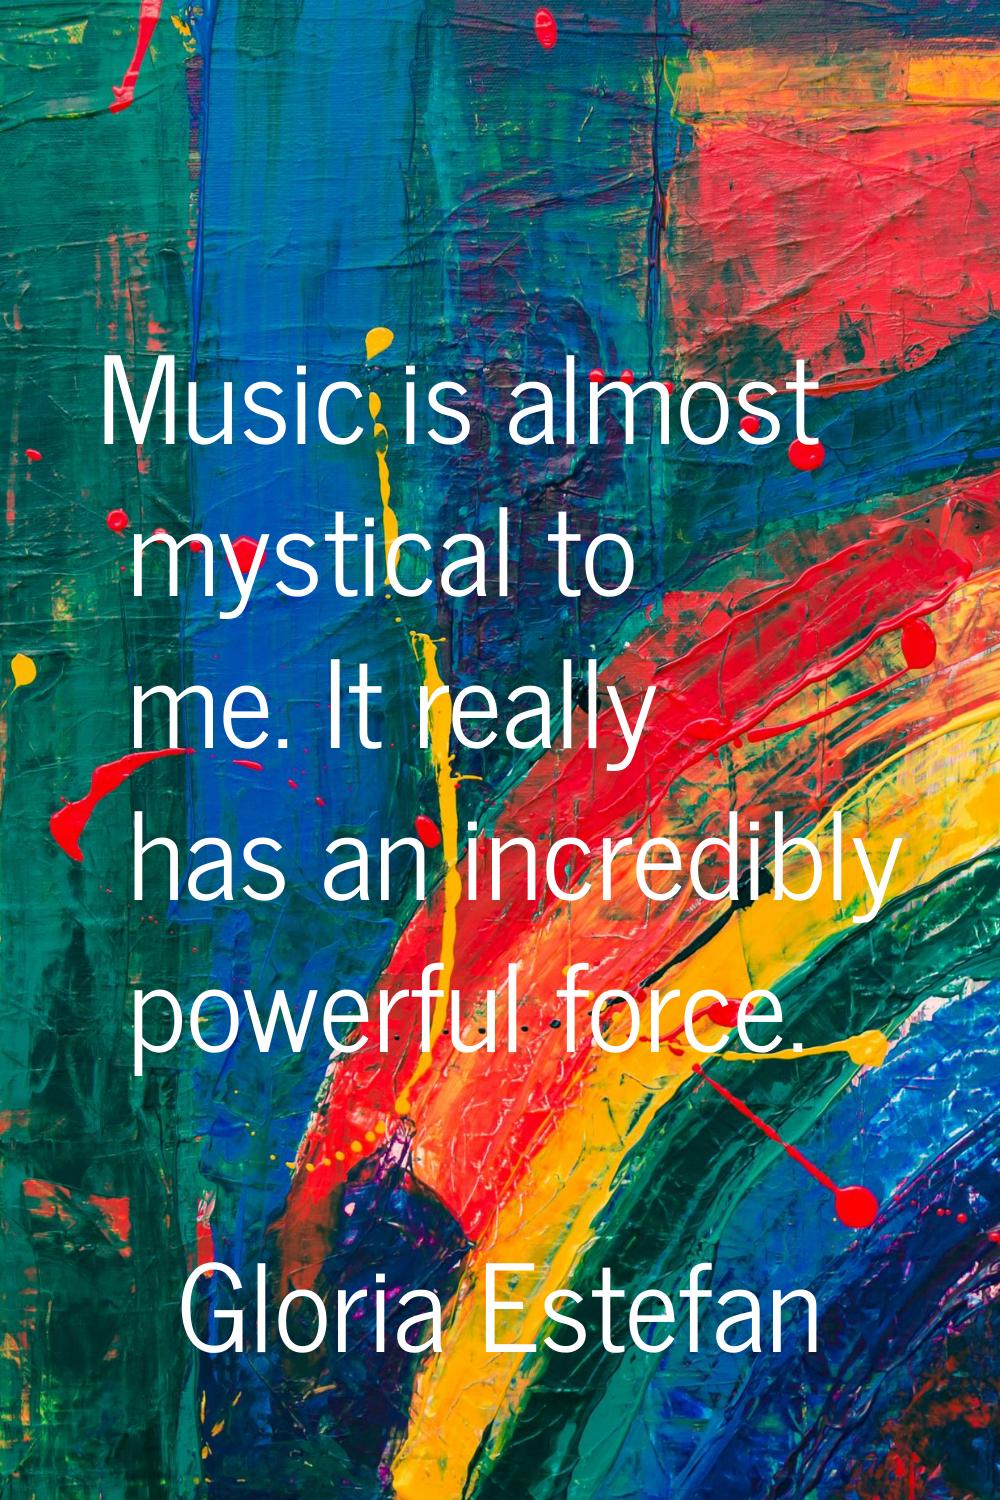 Music is almost mystical to me. It really has an incredibly powerful force.